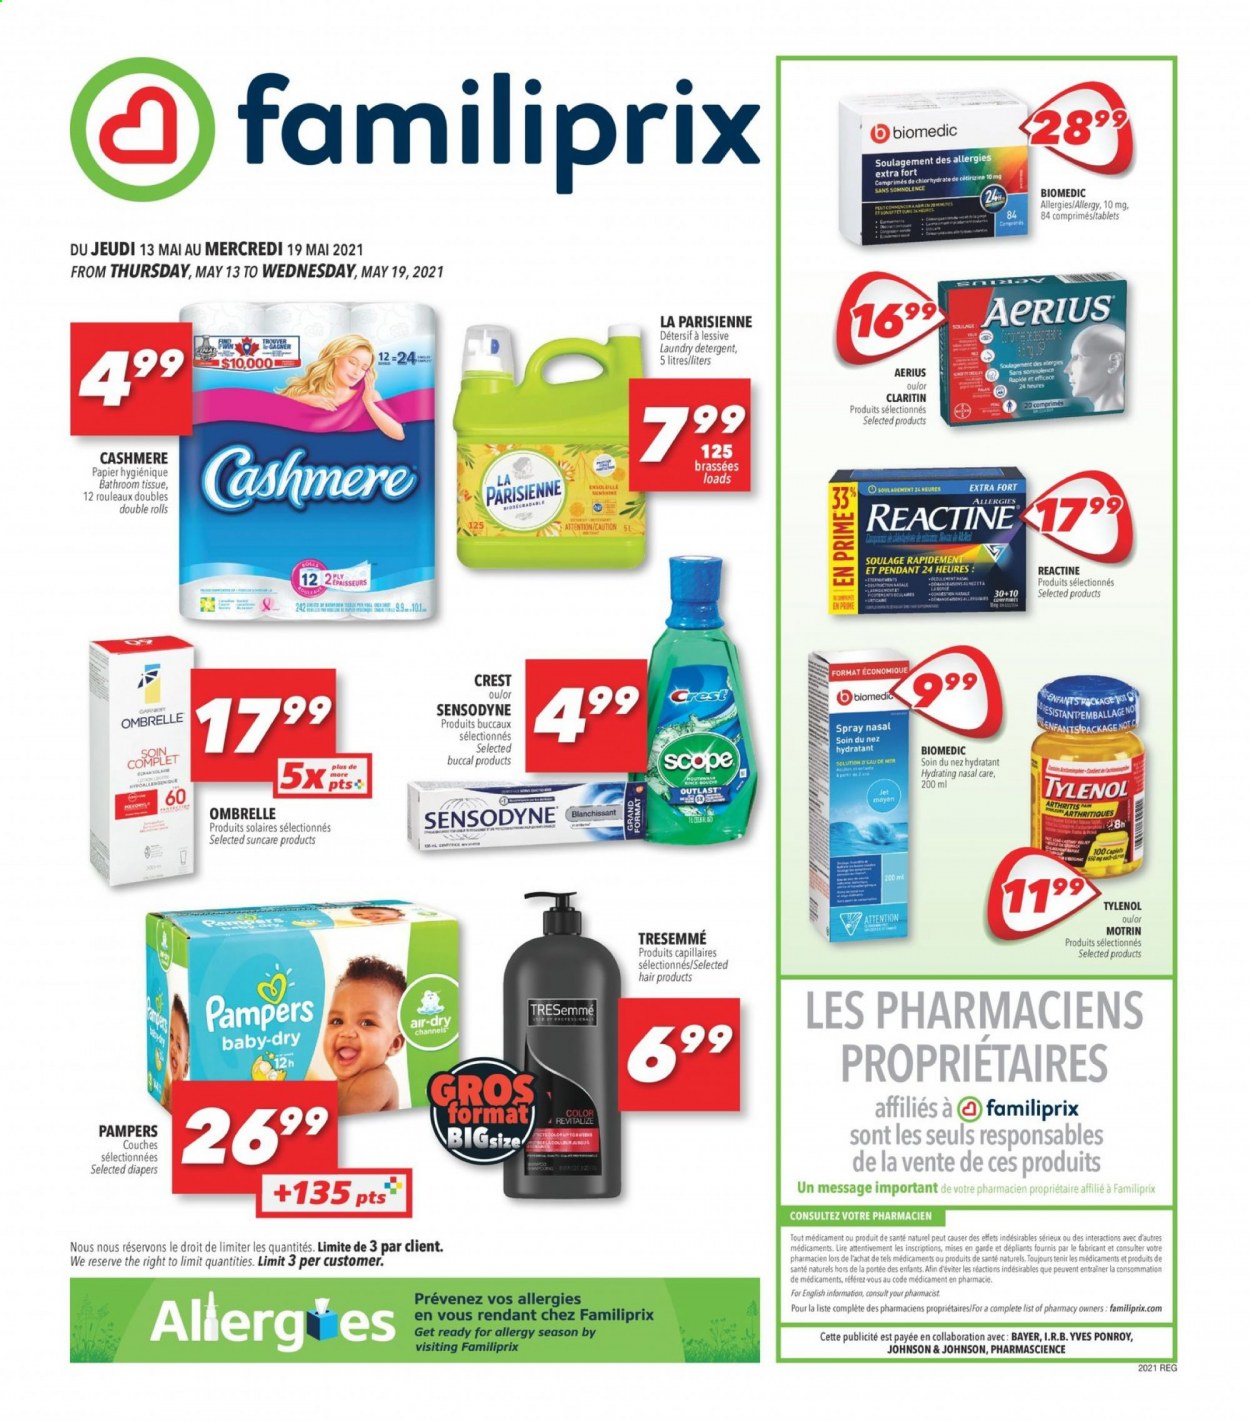 thumbnail - Familiprix Flyer - May 13, 2021 - May 19, 2021 - Sales products - nappies, Johnson's, bath tissue, laundry detergent, Jet, Crest, TRESemmé, Tylenol, Bayer, Motrin, Pampers, Sensodyne. Page 1.